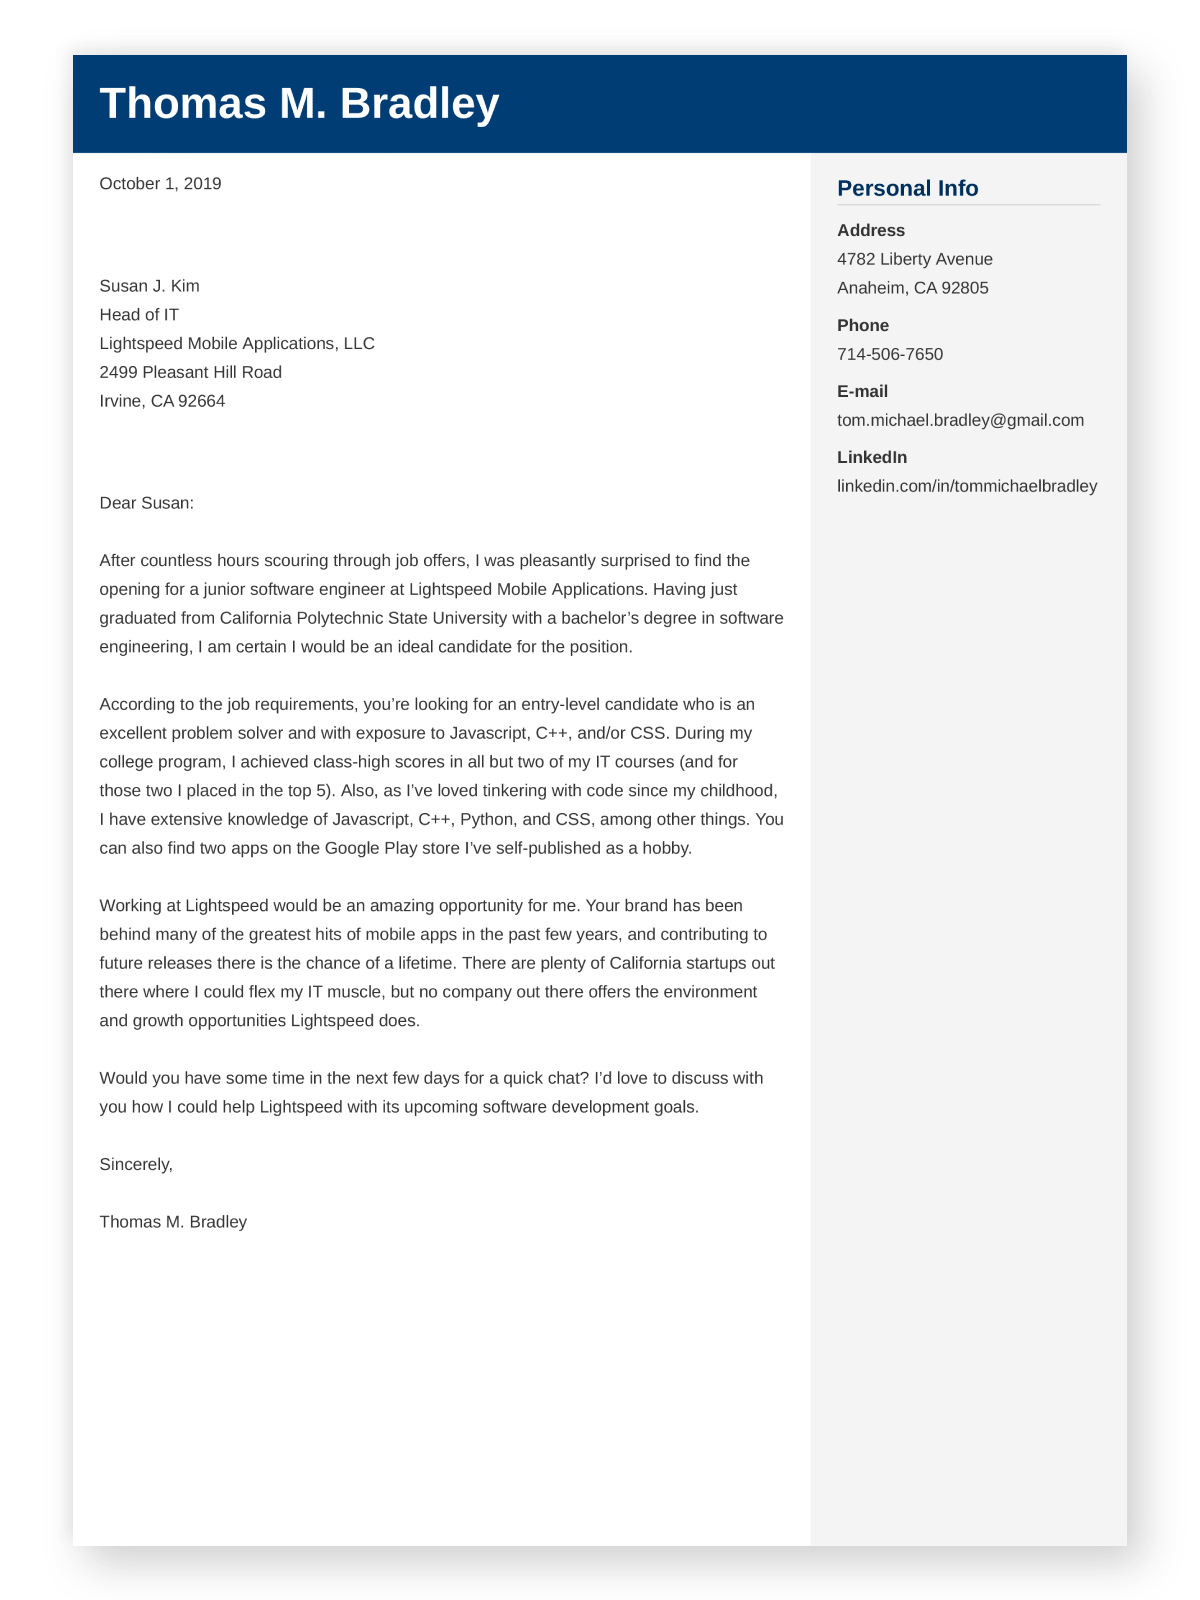 Writing A Letter Of Application from cdn-images.zety.com